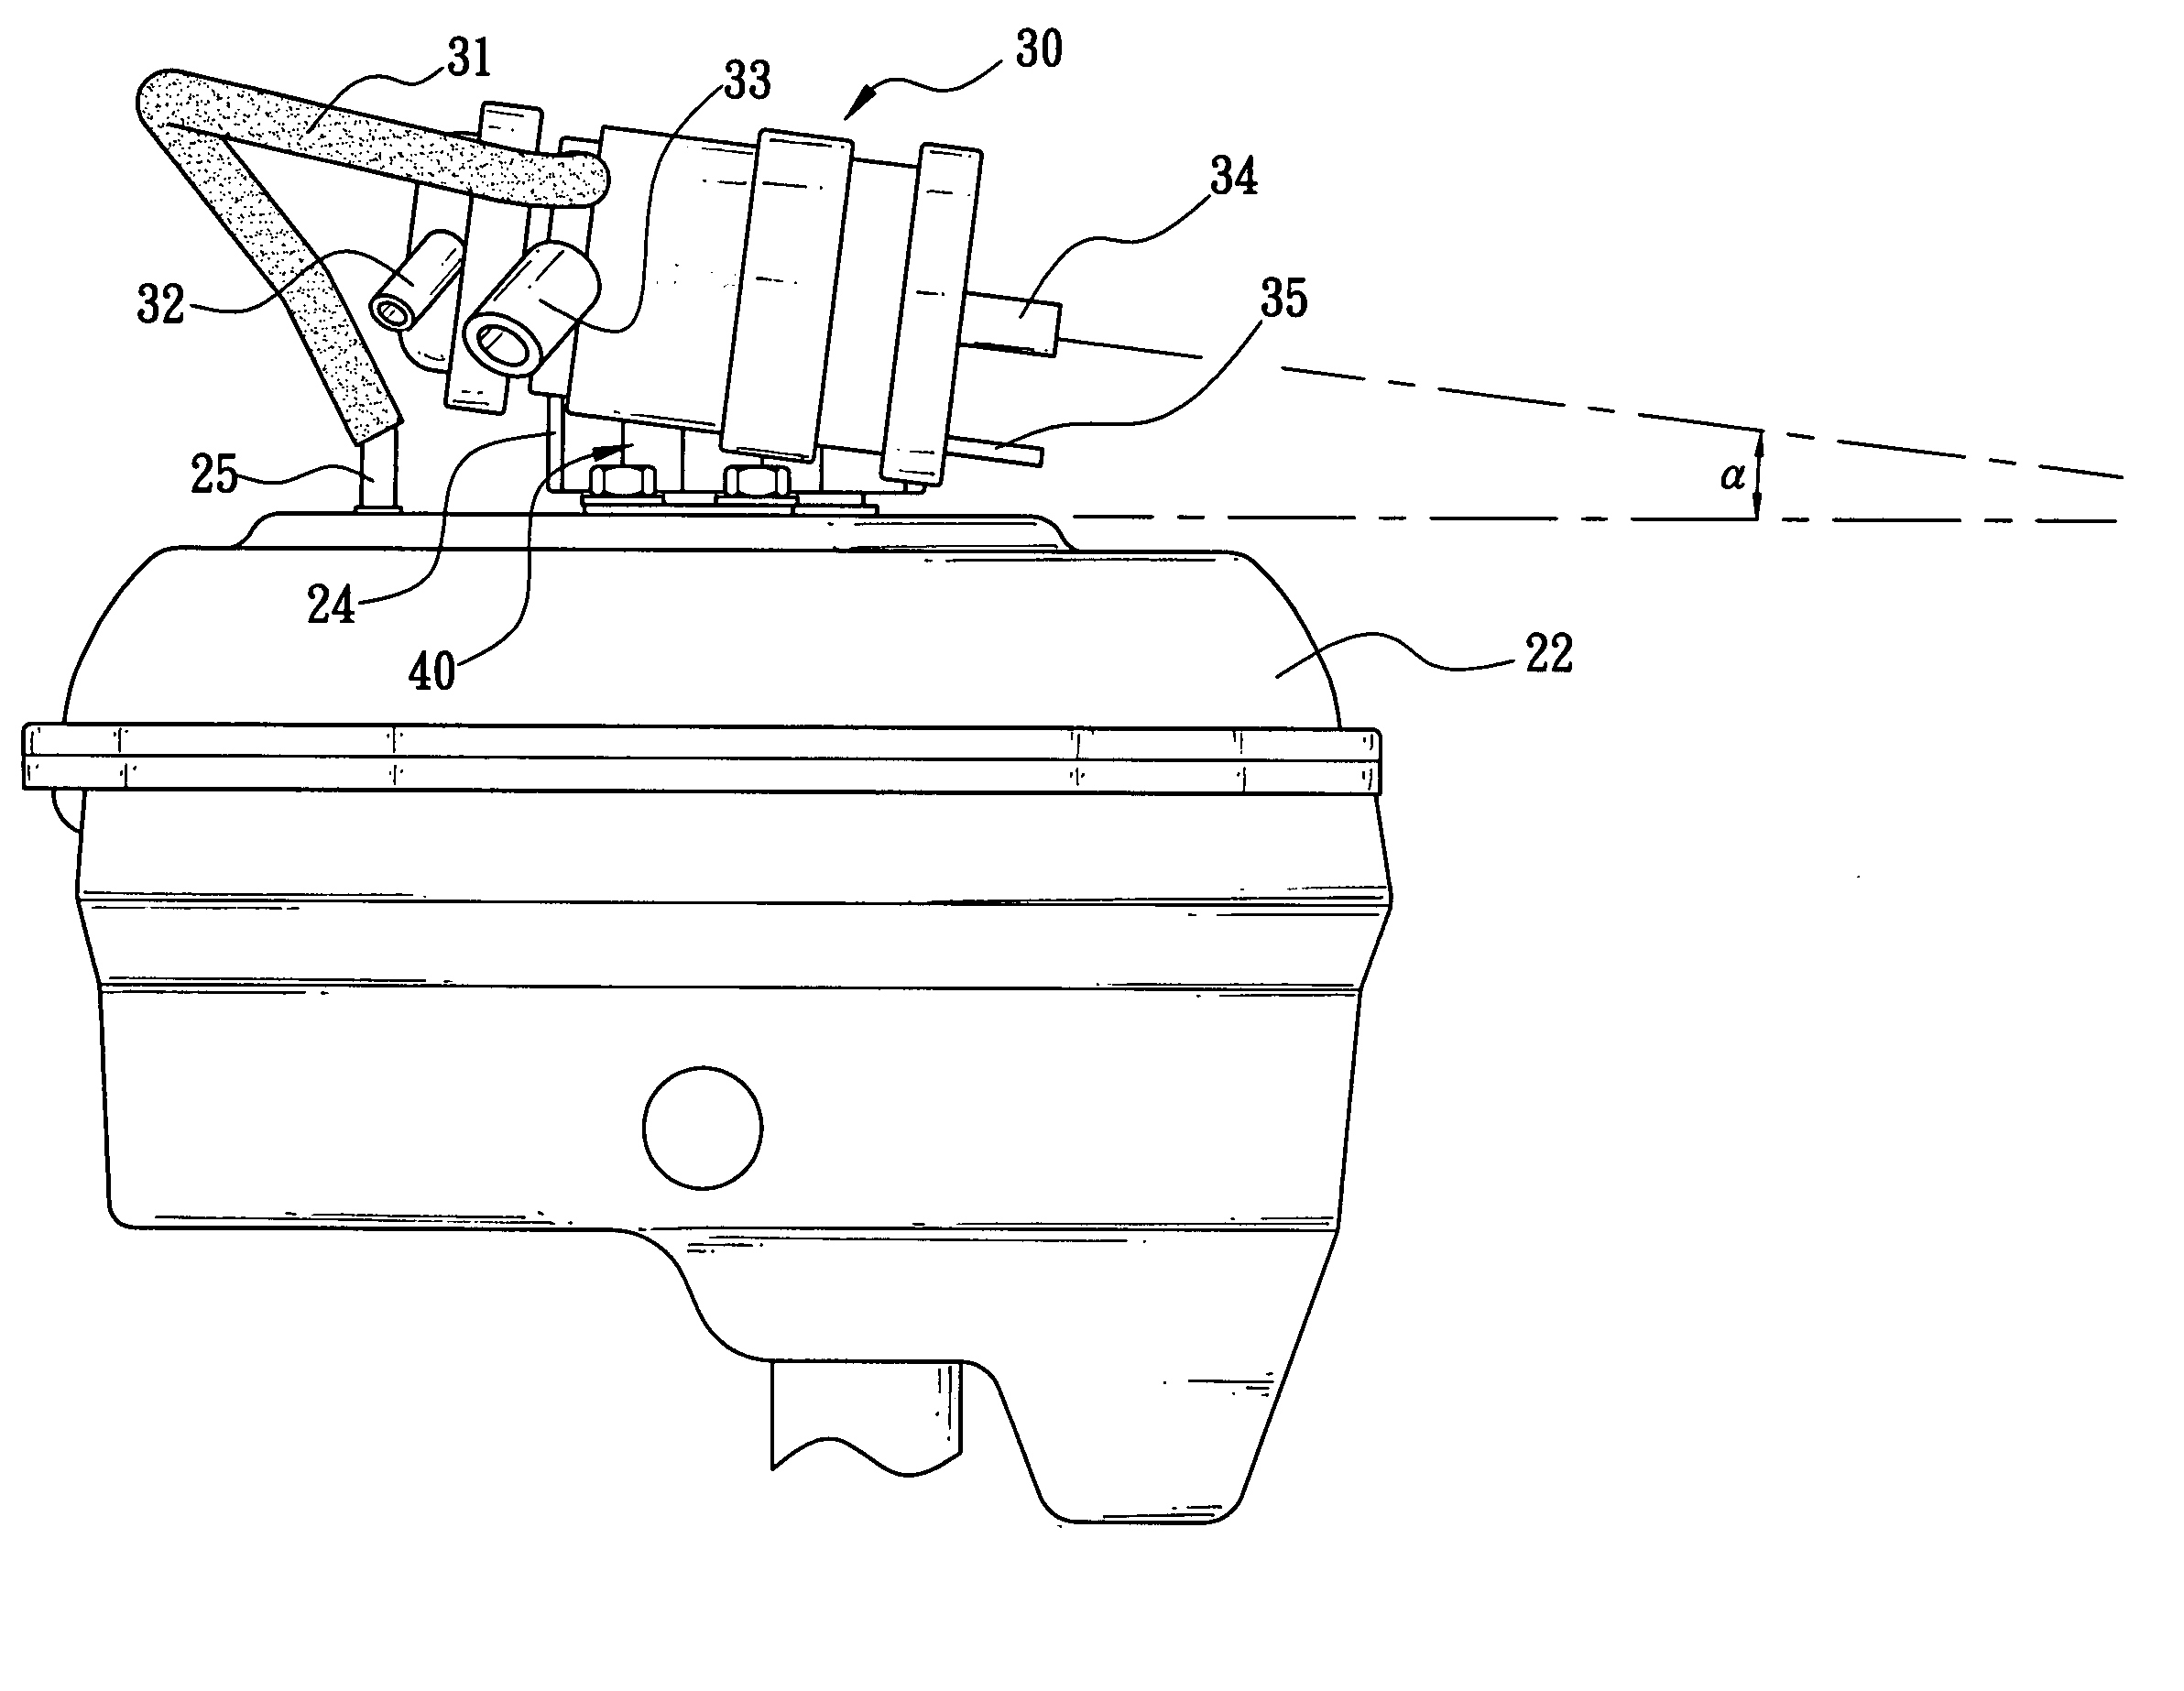 Gas filtering and recirculating device for general machine